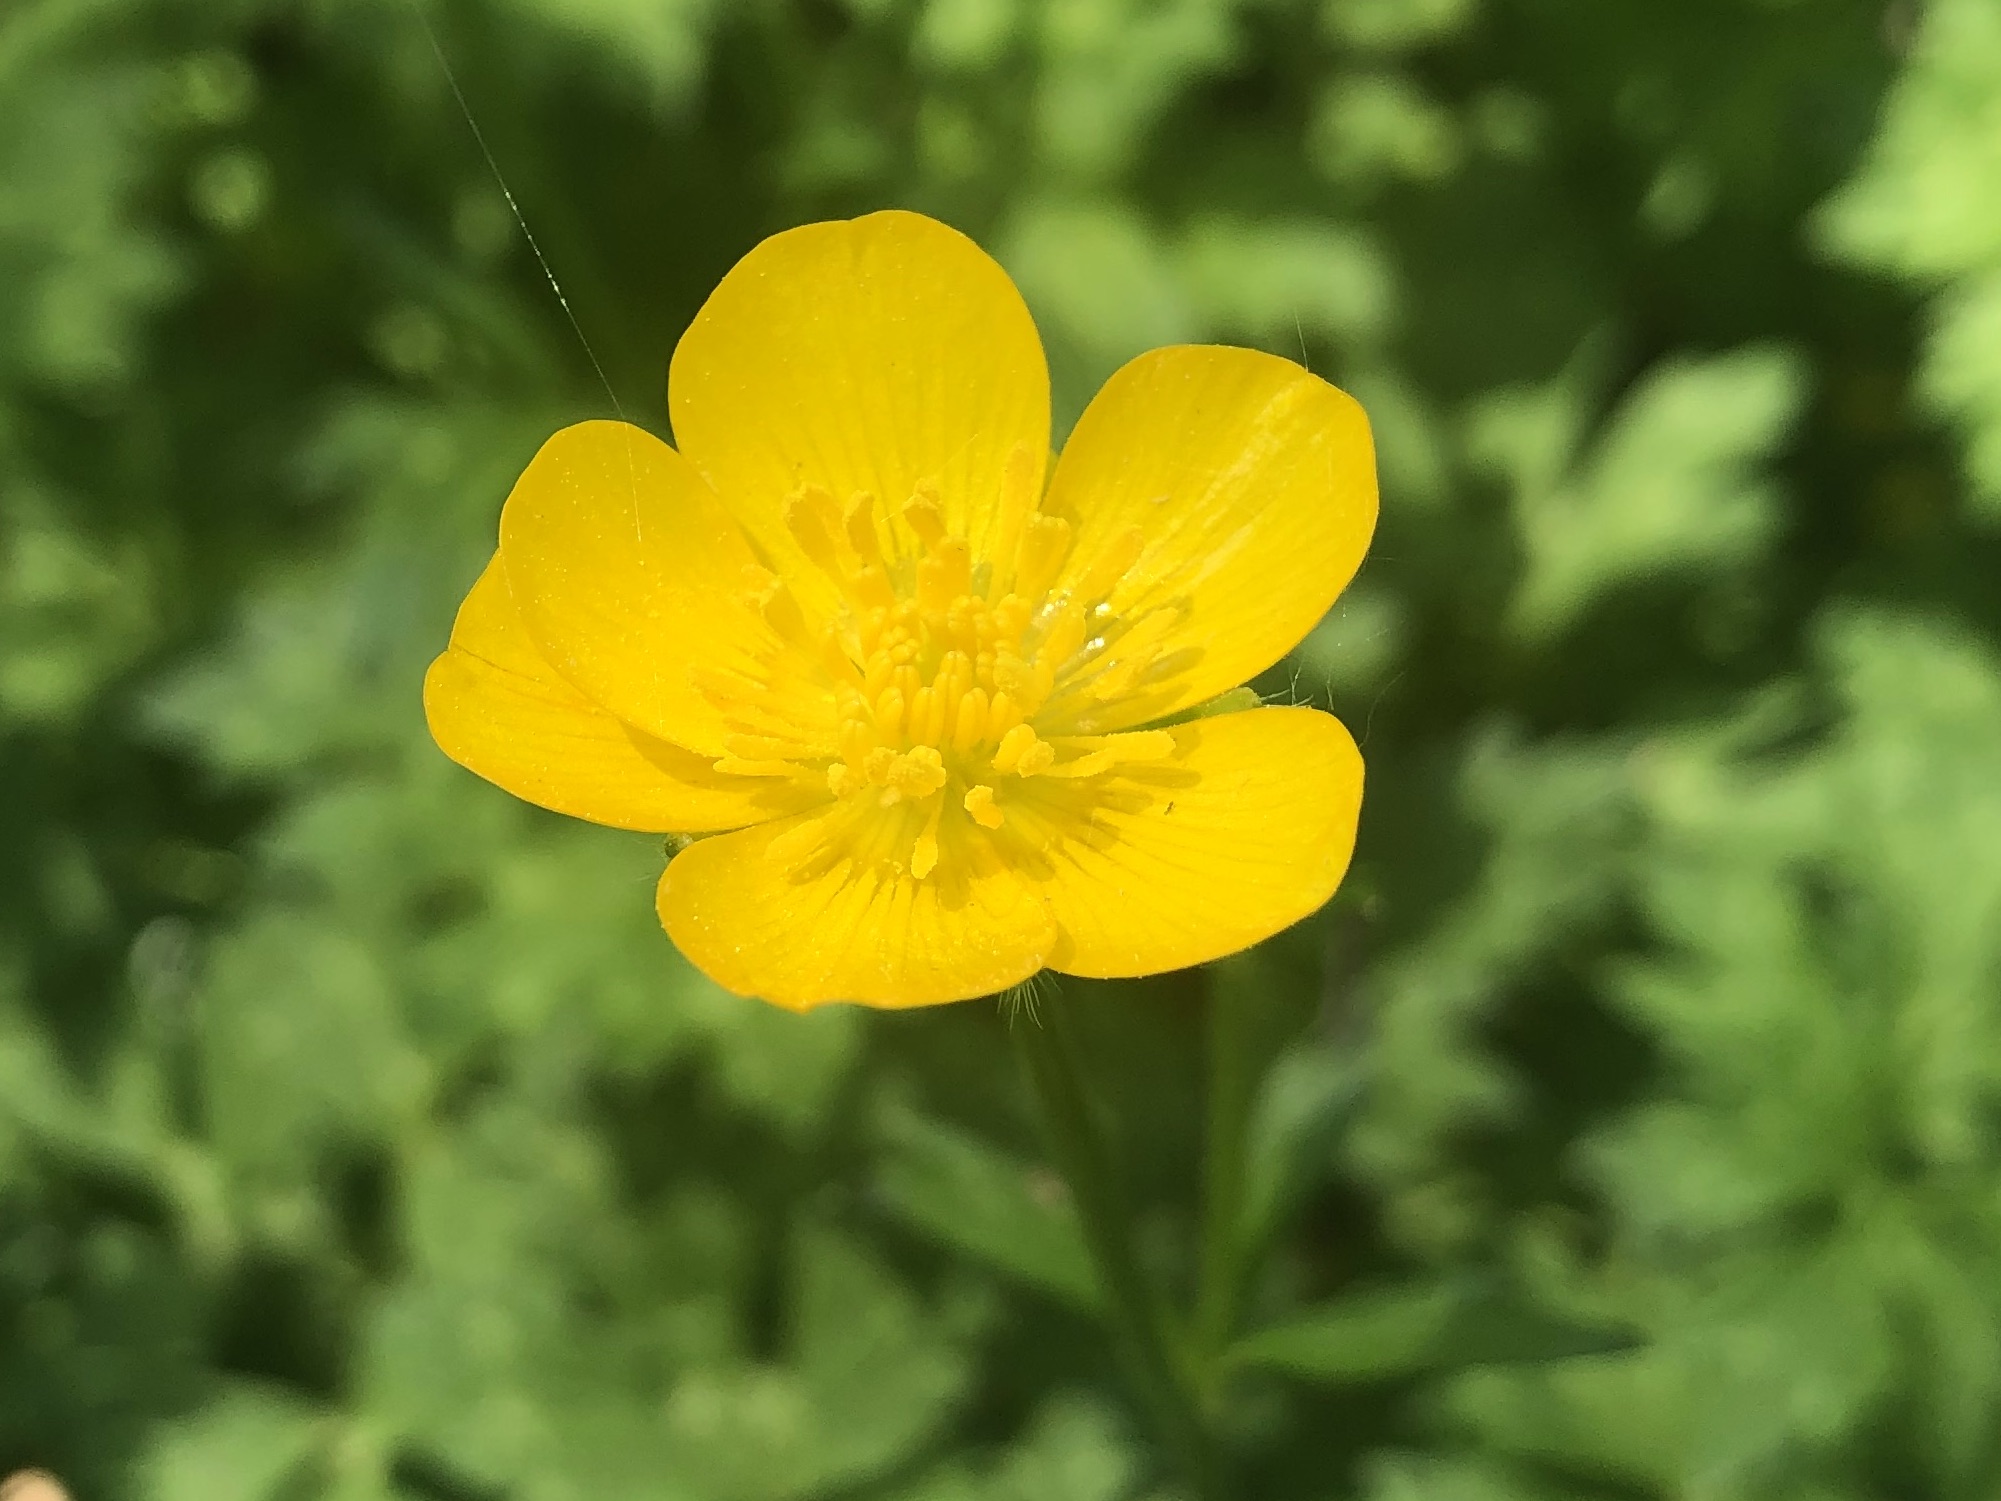 Creeping Buttercup in a grassy clearing along the bike path between Odana Road and Midvale Boulevard in Madison, Wisconsin on June 2, 2022.